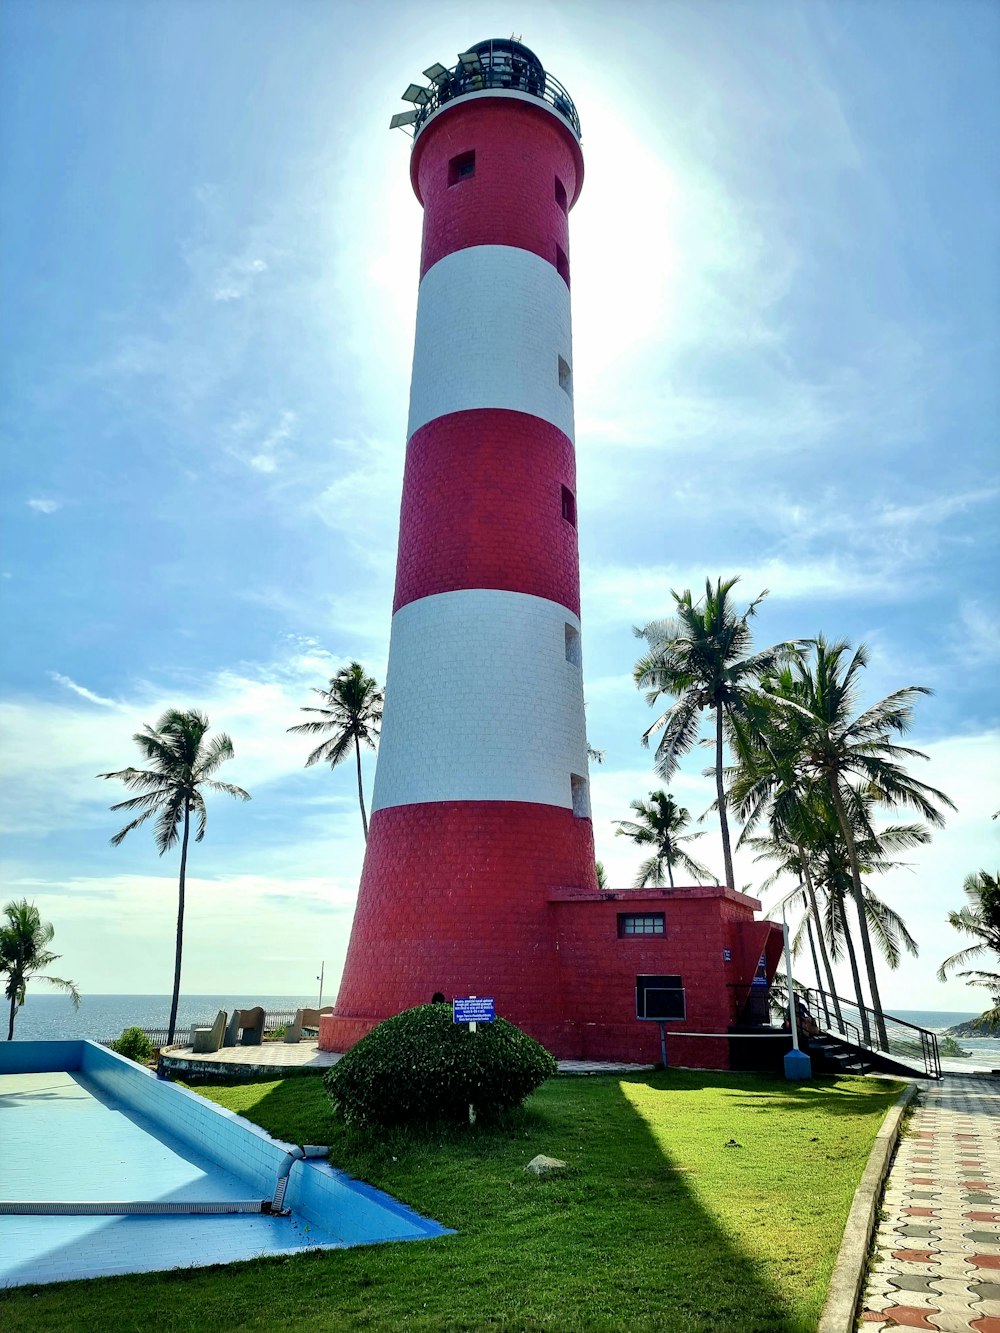 a lighthouse with a red and white striped top